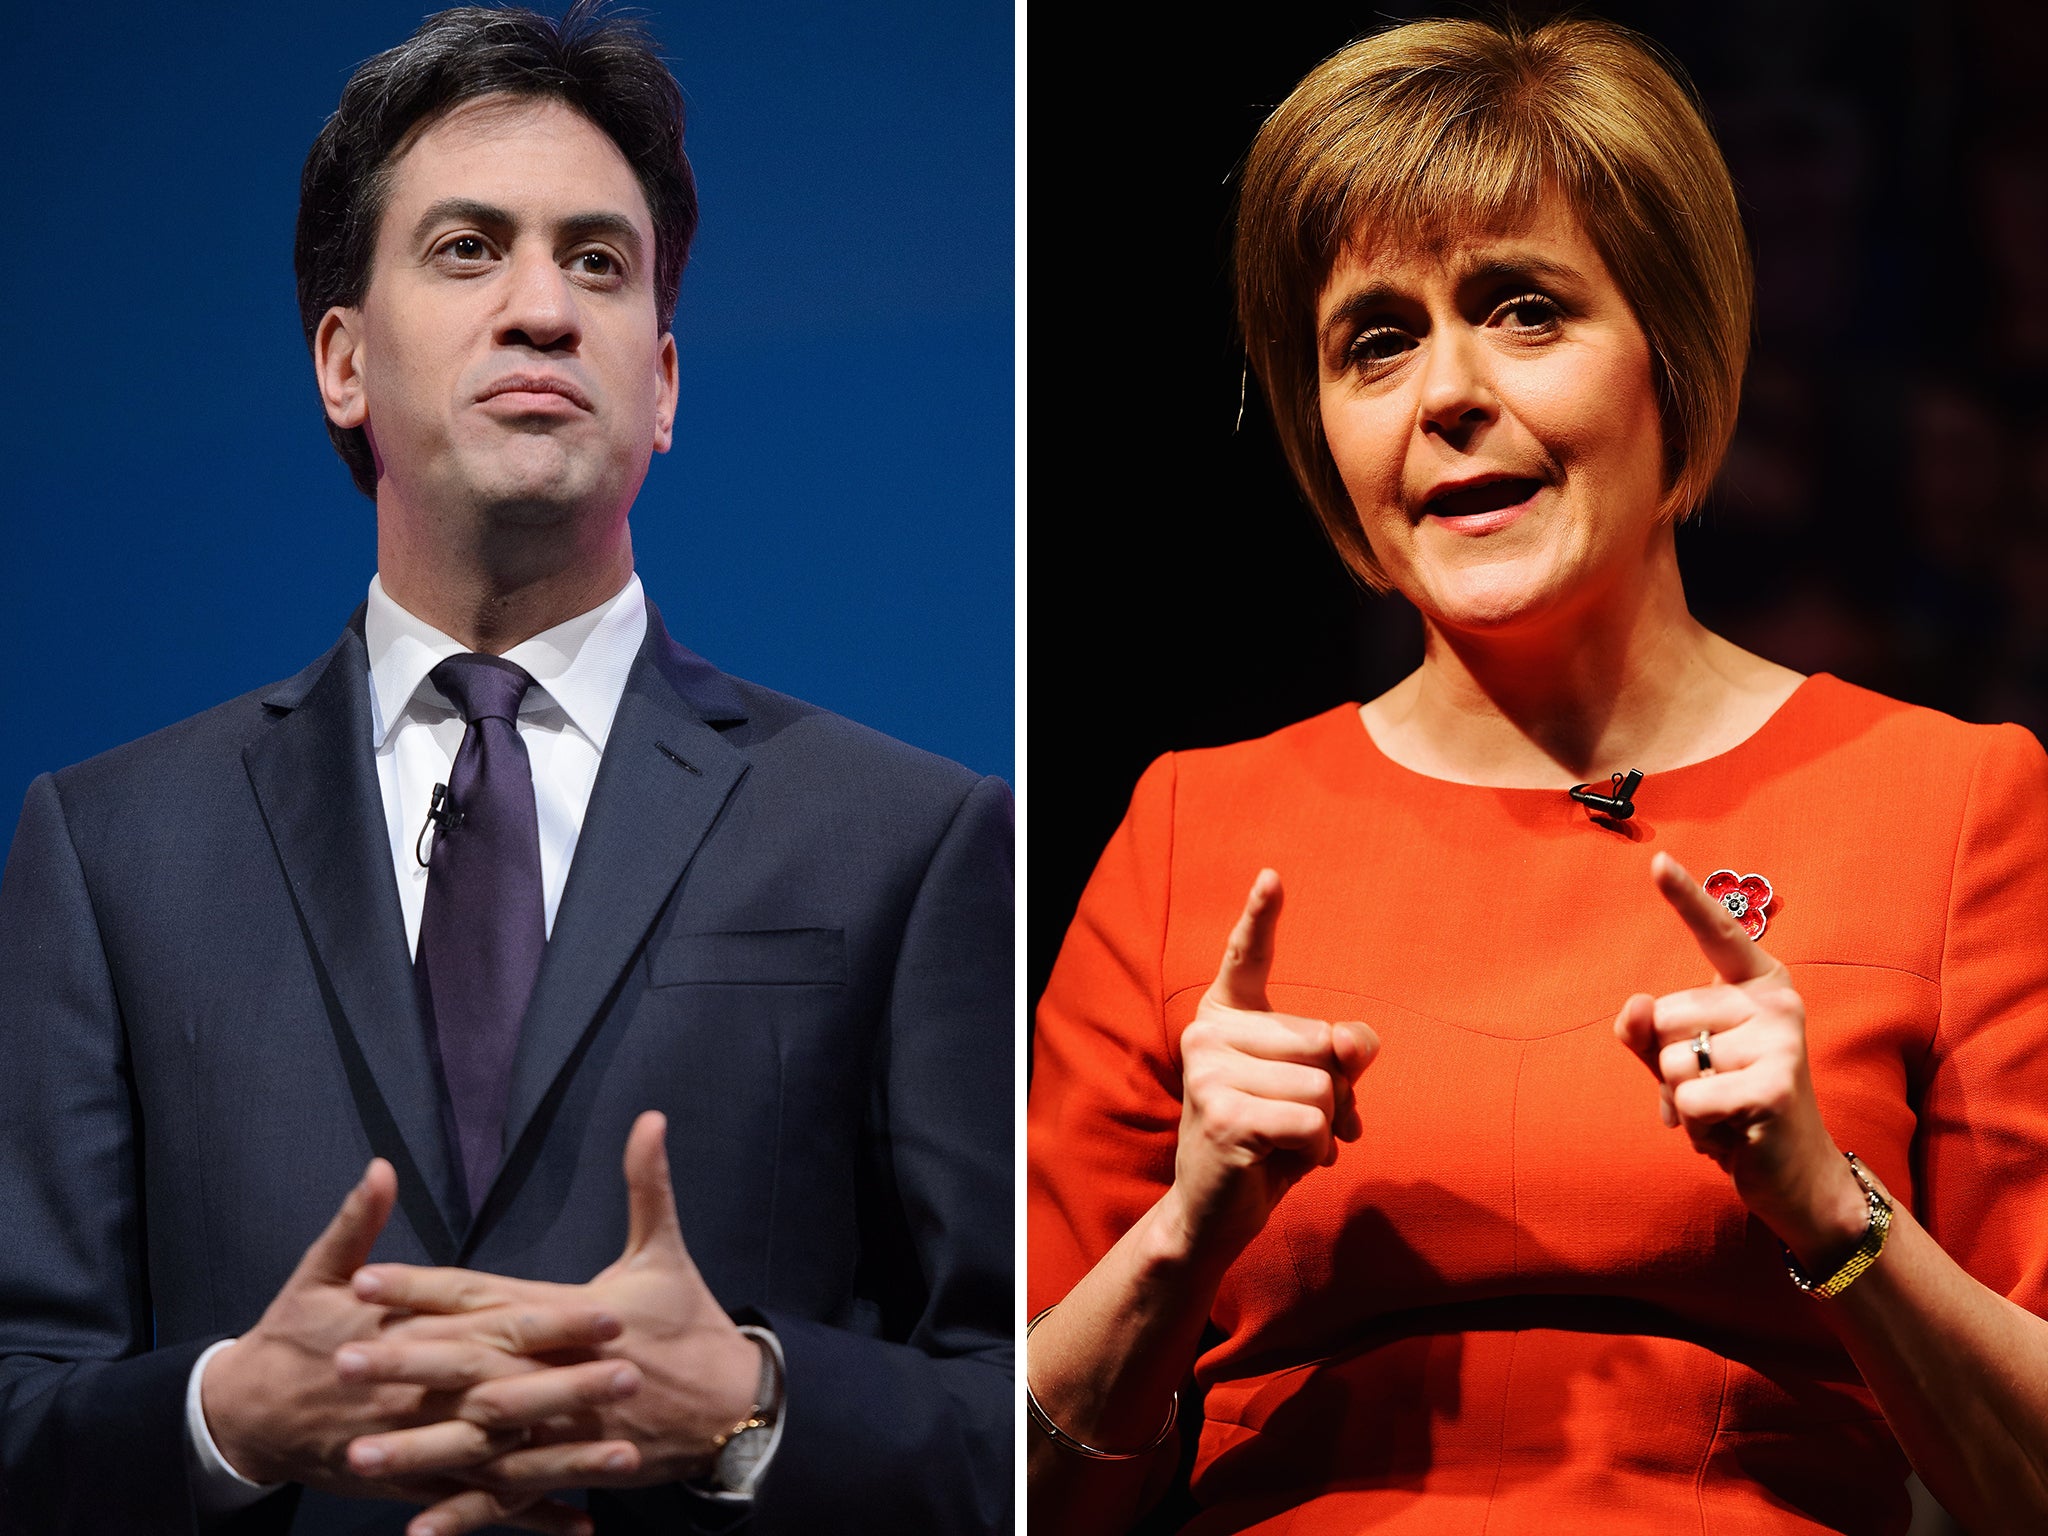 One possible outcome of the May election is a minority Labour government in coalition with the SNP